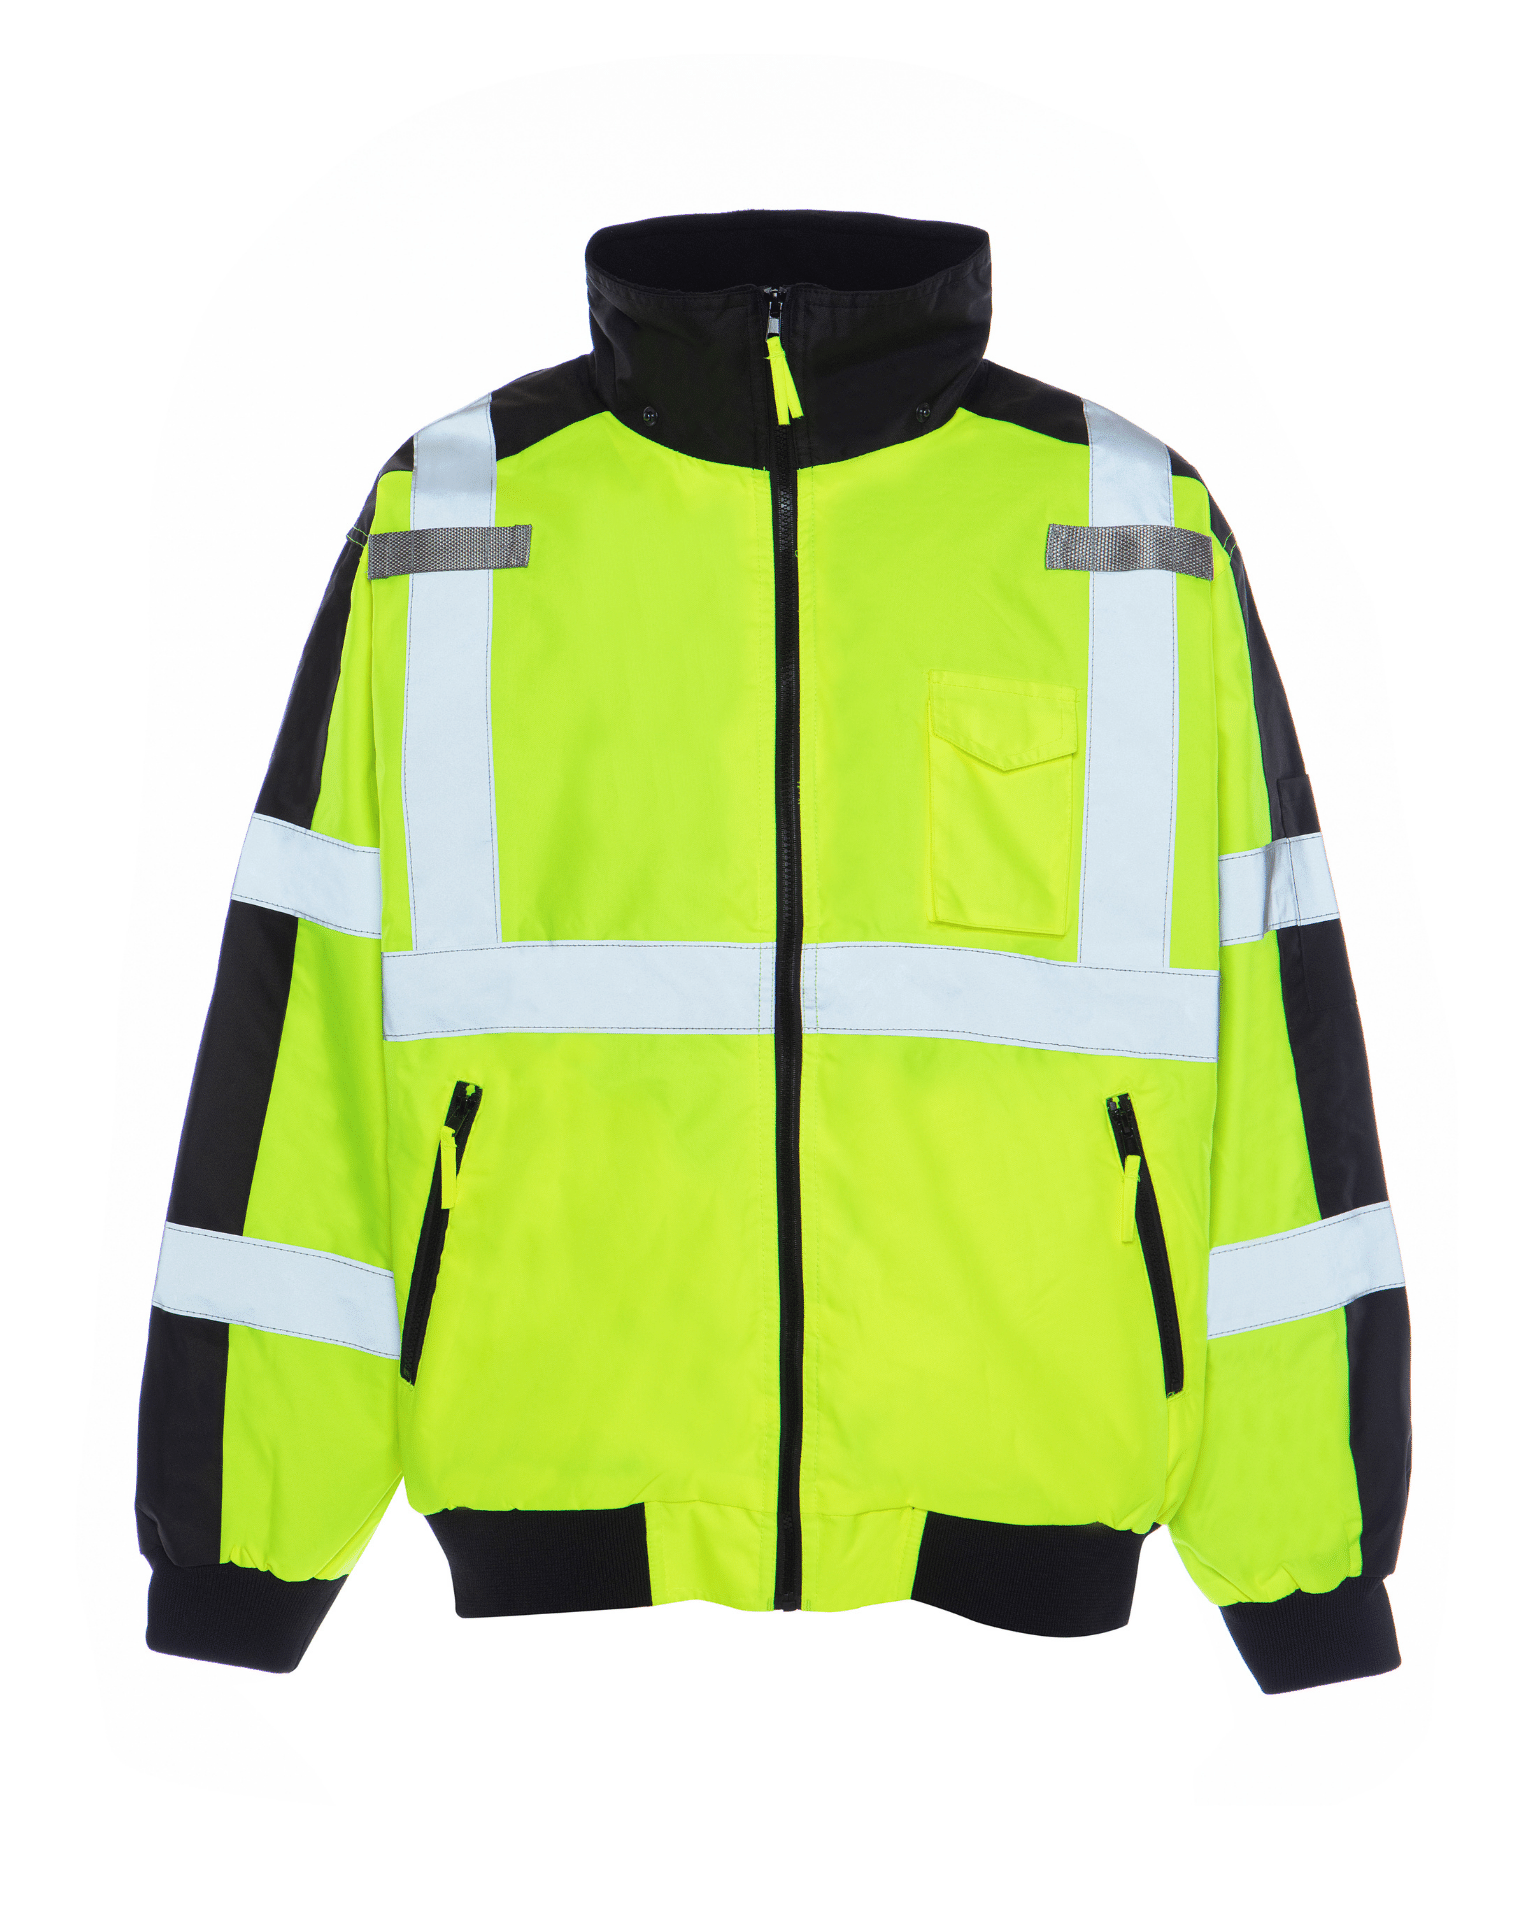 ANSI Class 3 High Visibility 3-Season versatile water and stain repellent bomber jacket by Utility Pro